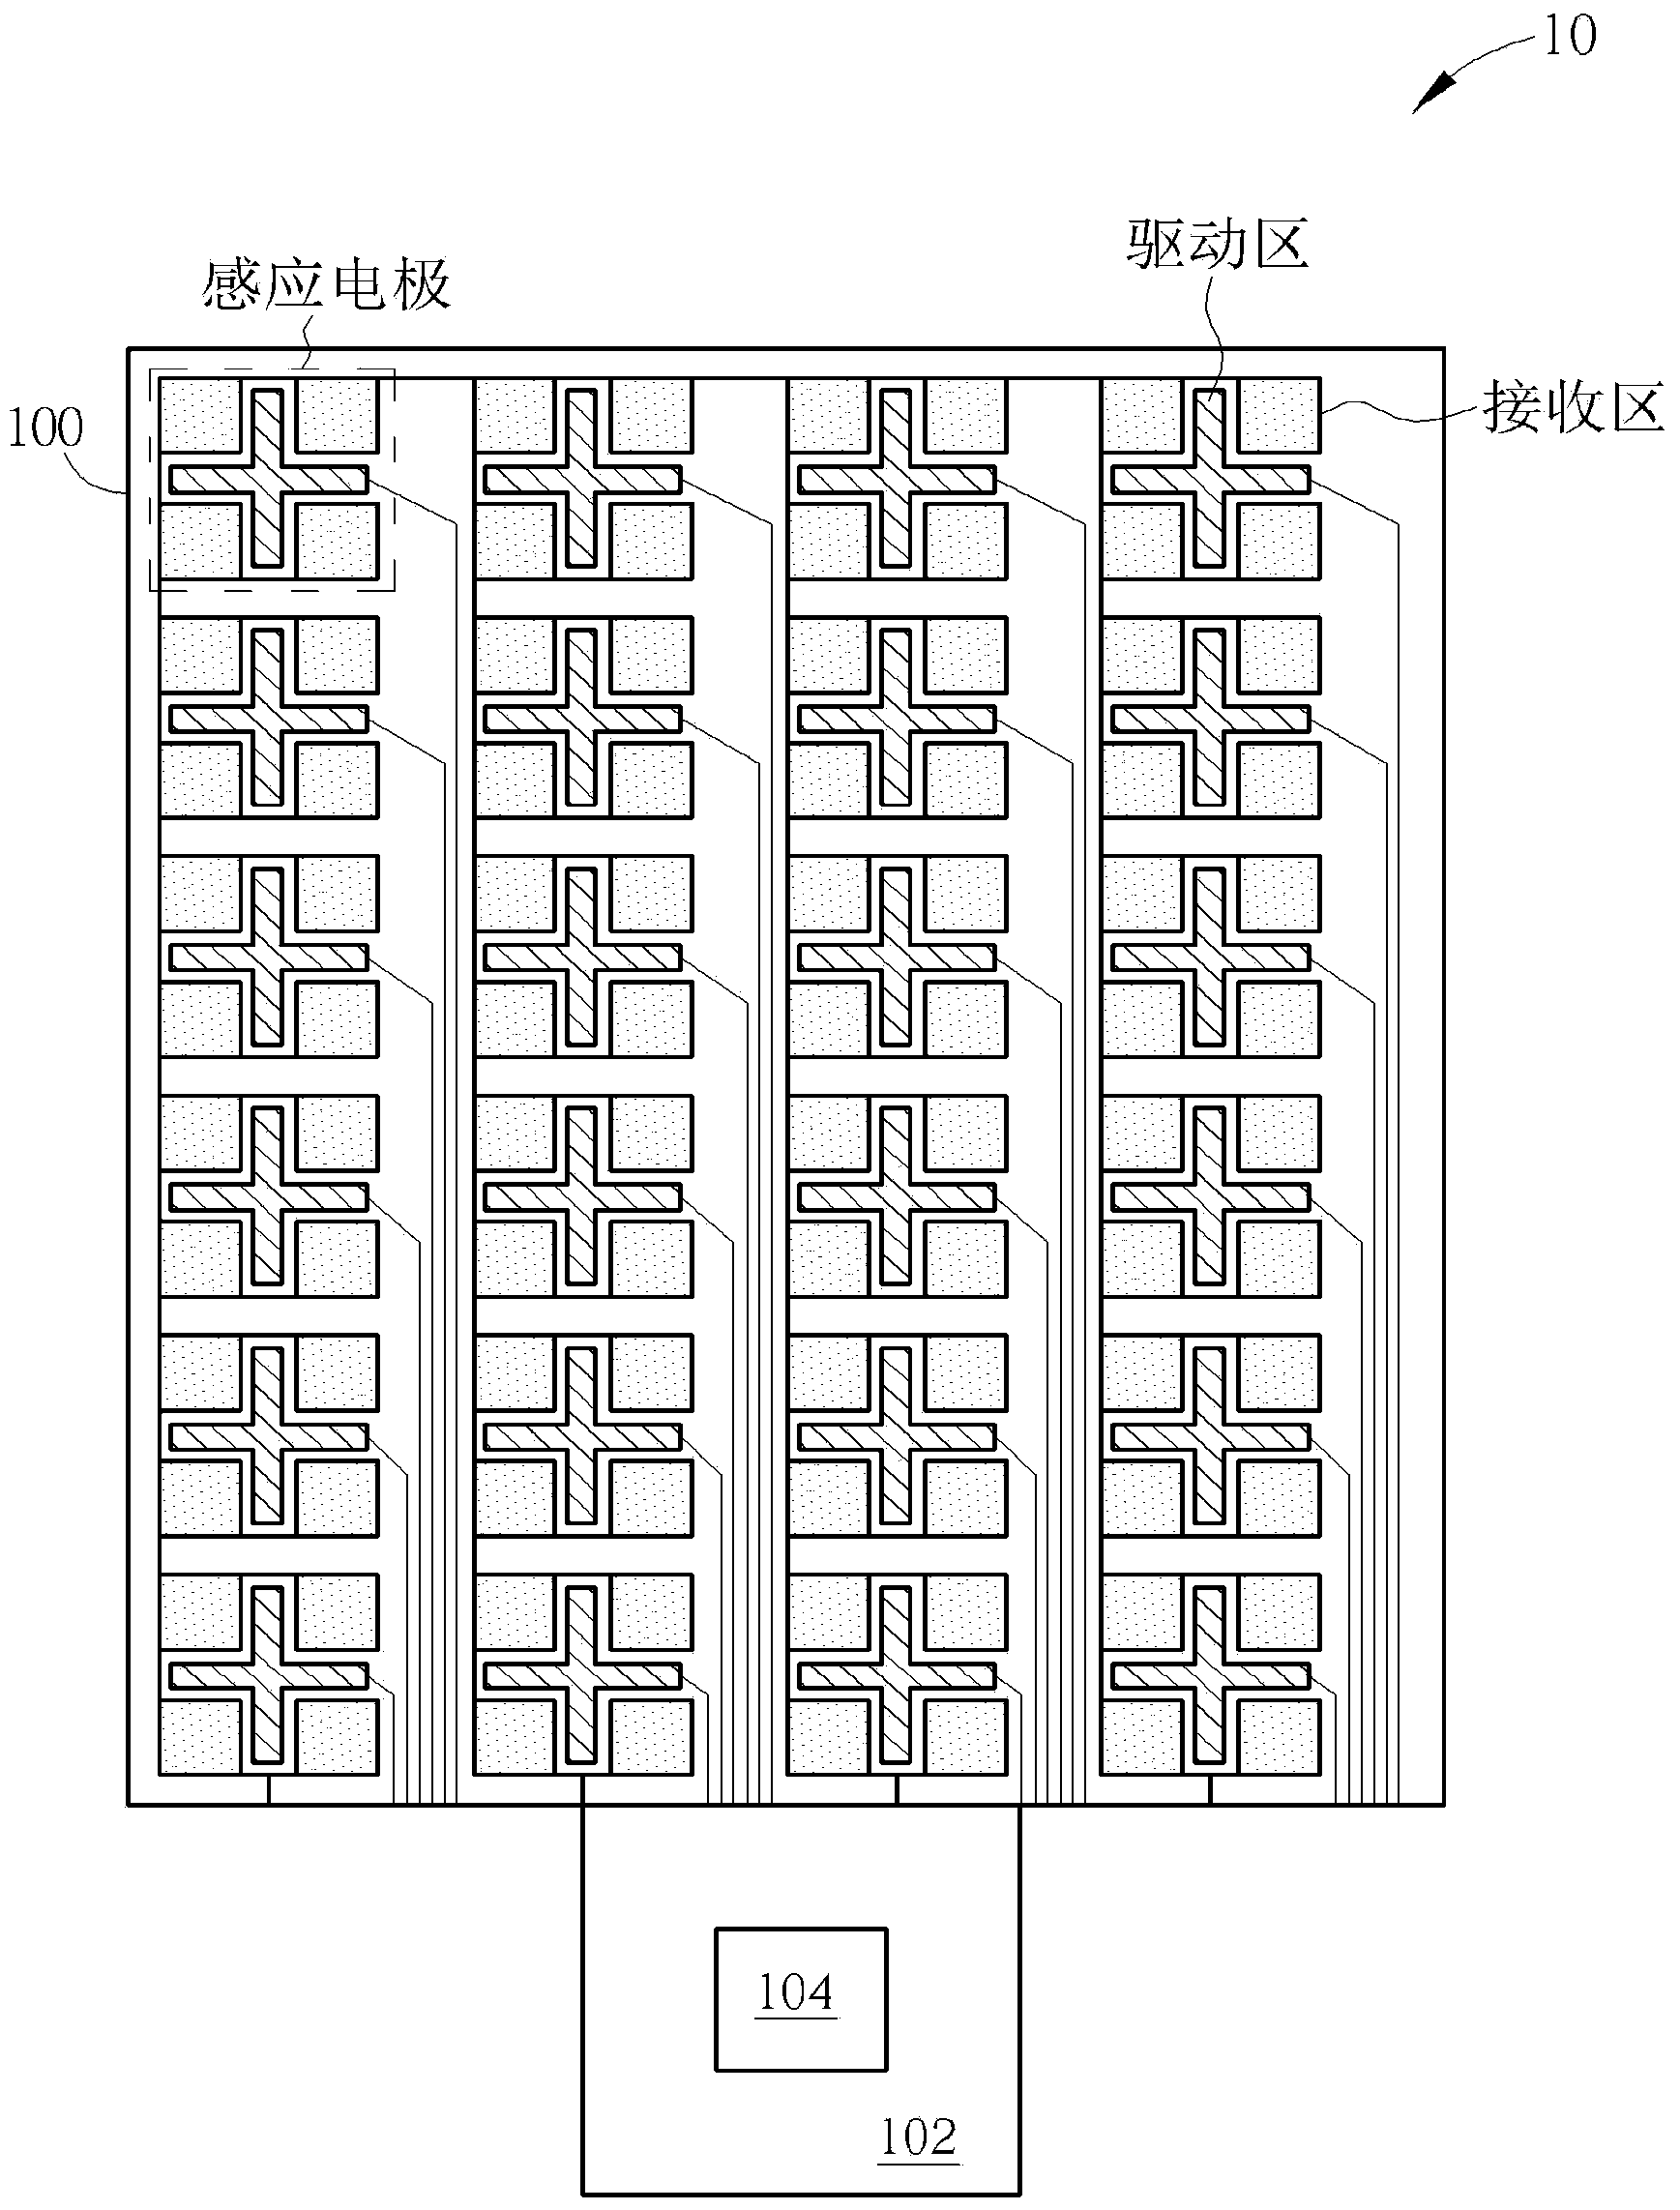 Drive induction method of single layer multipoint mutual capacitive touch screen